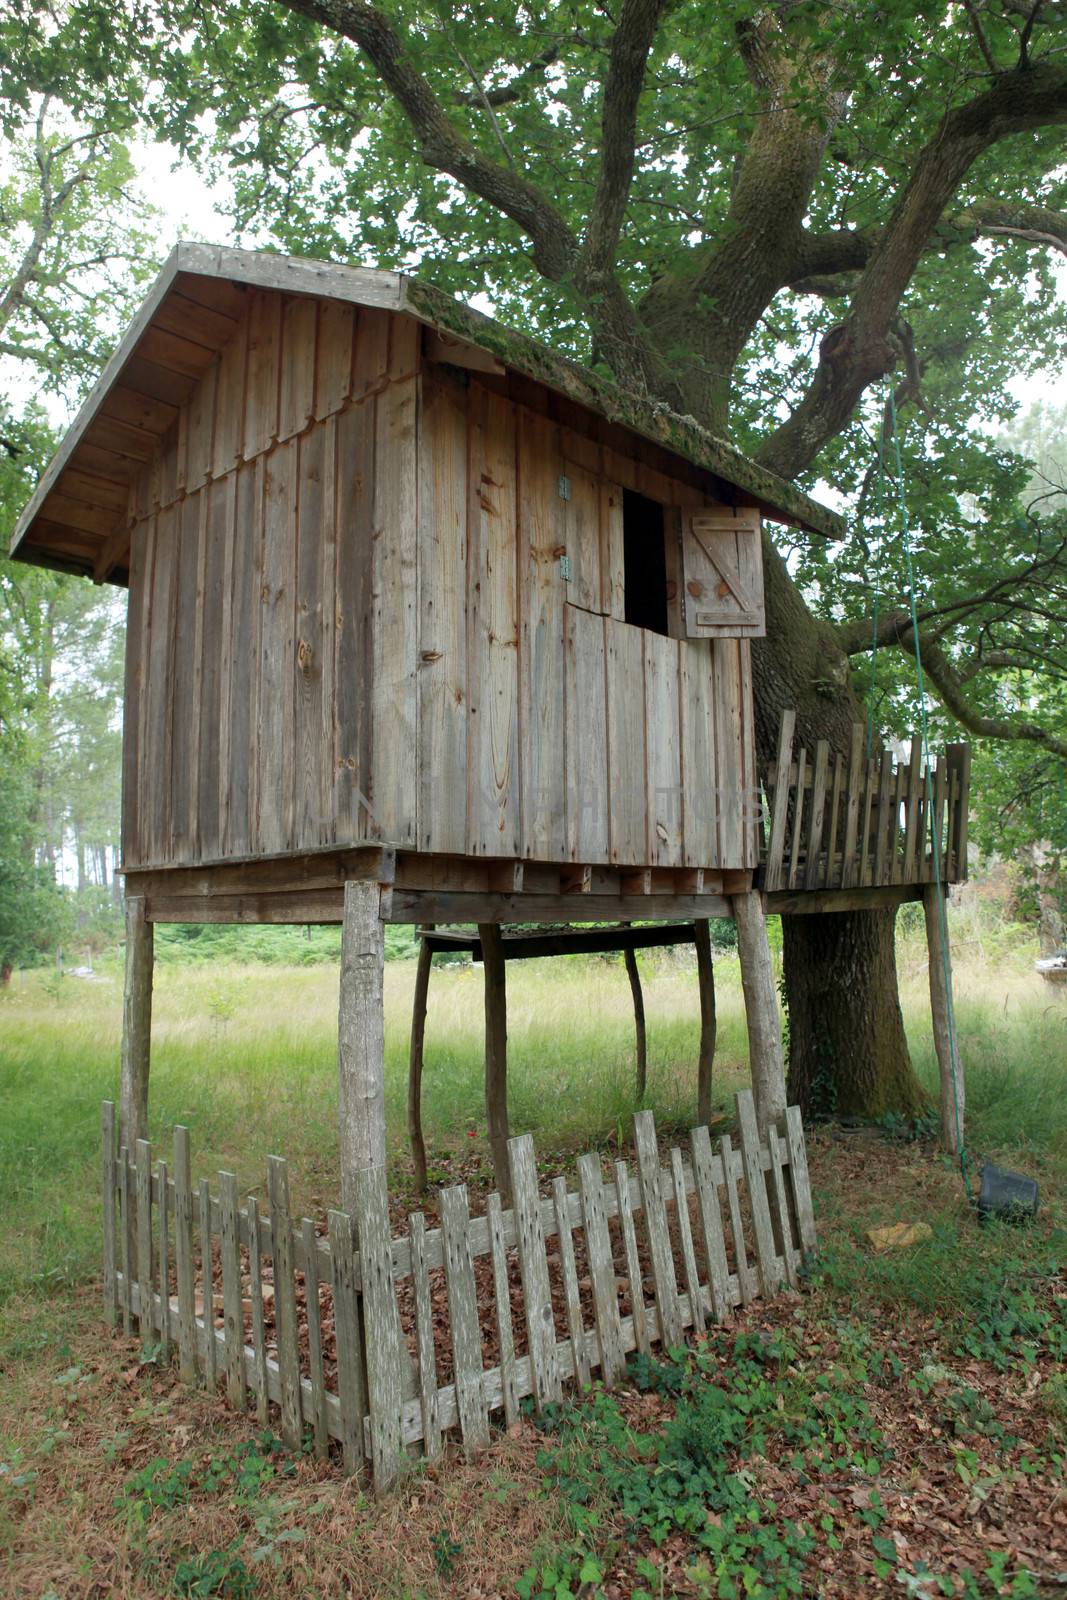 Tree house by phovoir